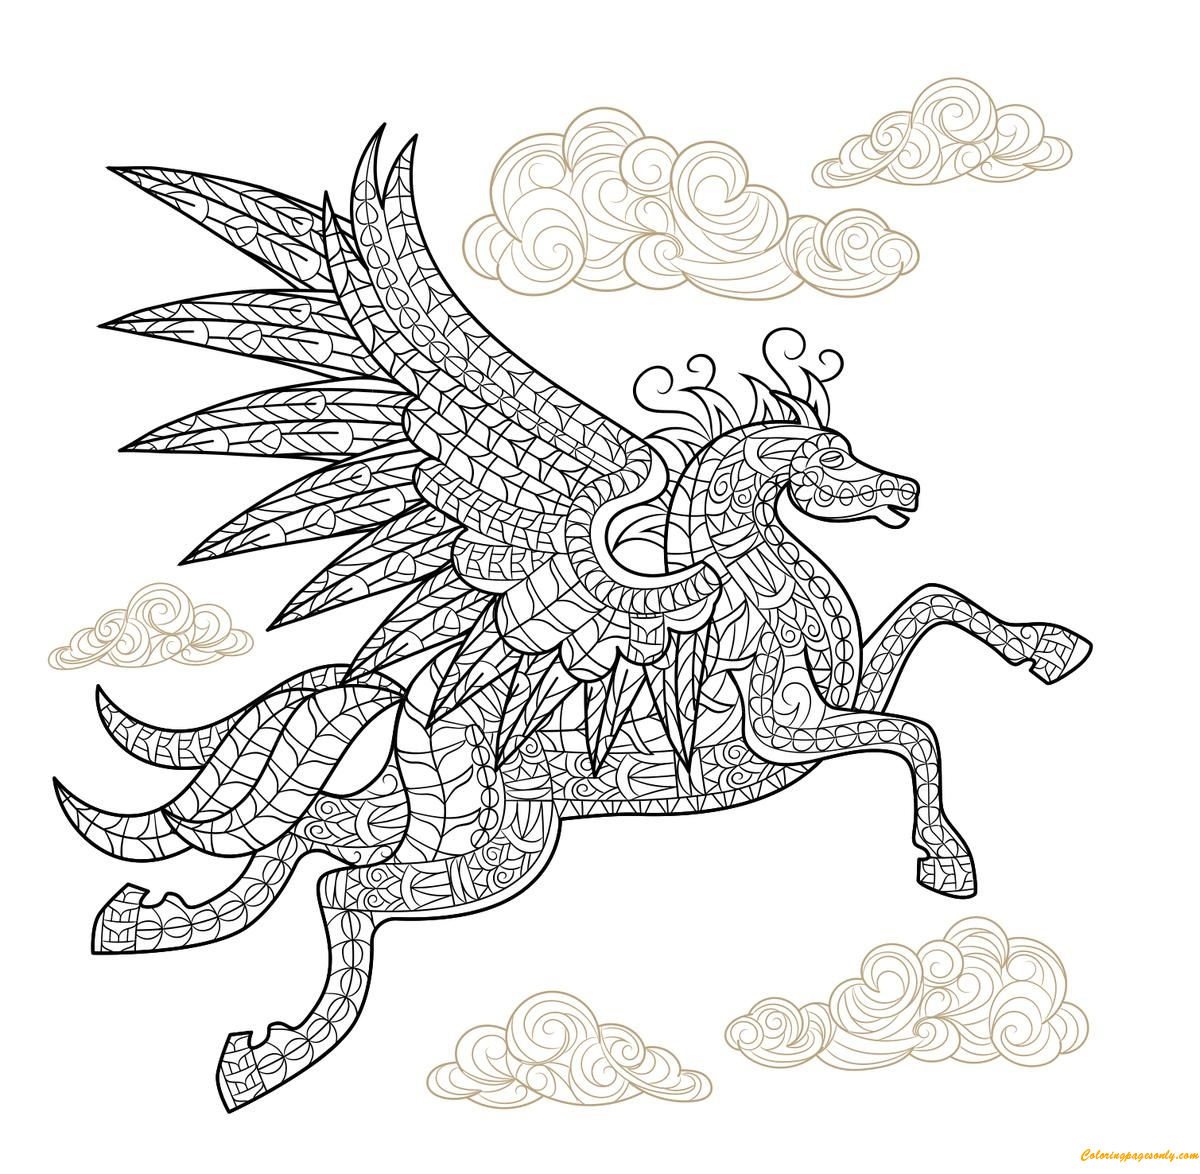 Pegasus Winged Horse Coloring Page - Free Coloring Pages Online